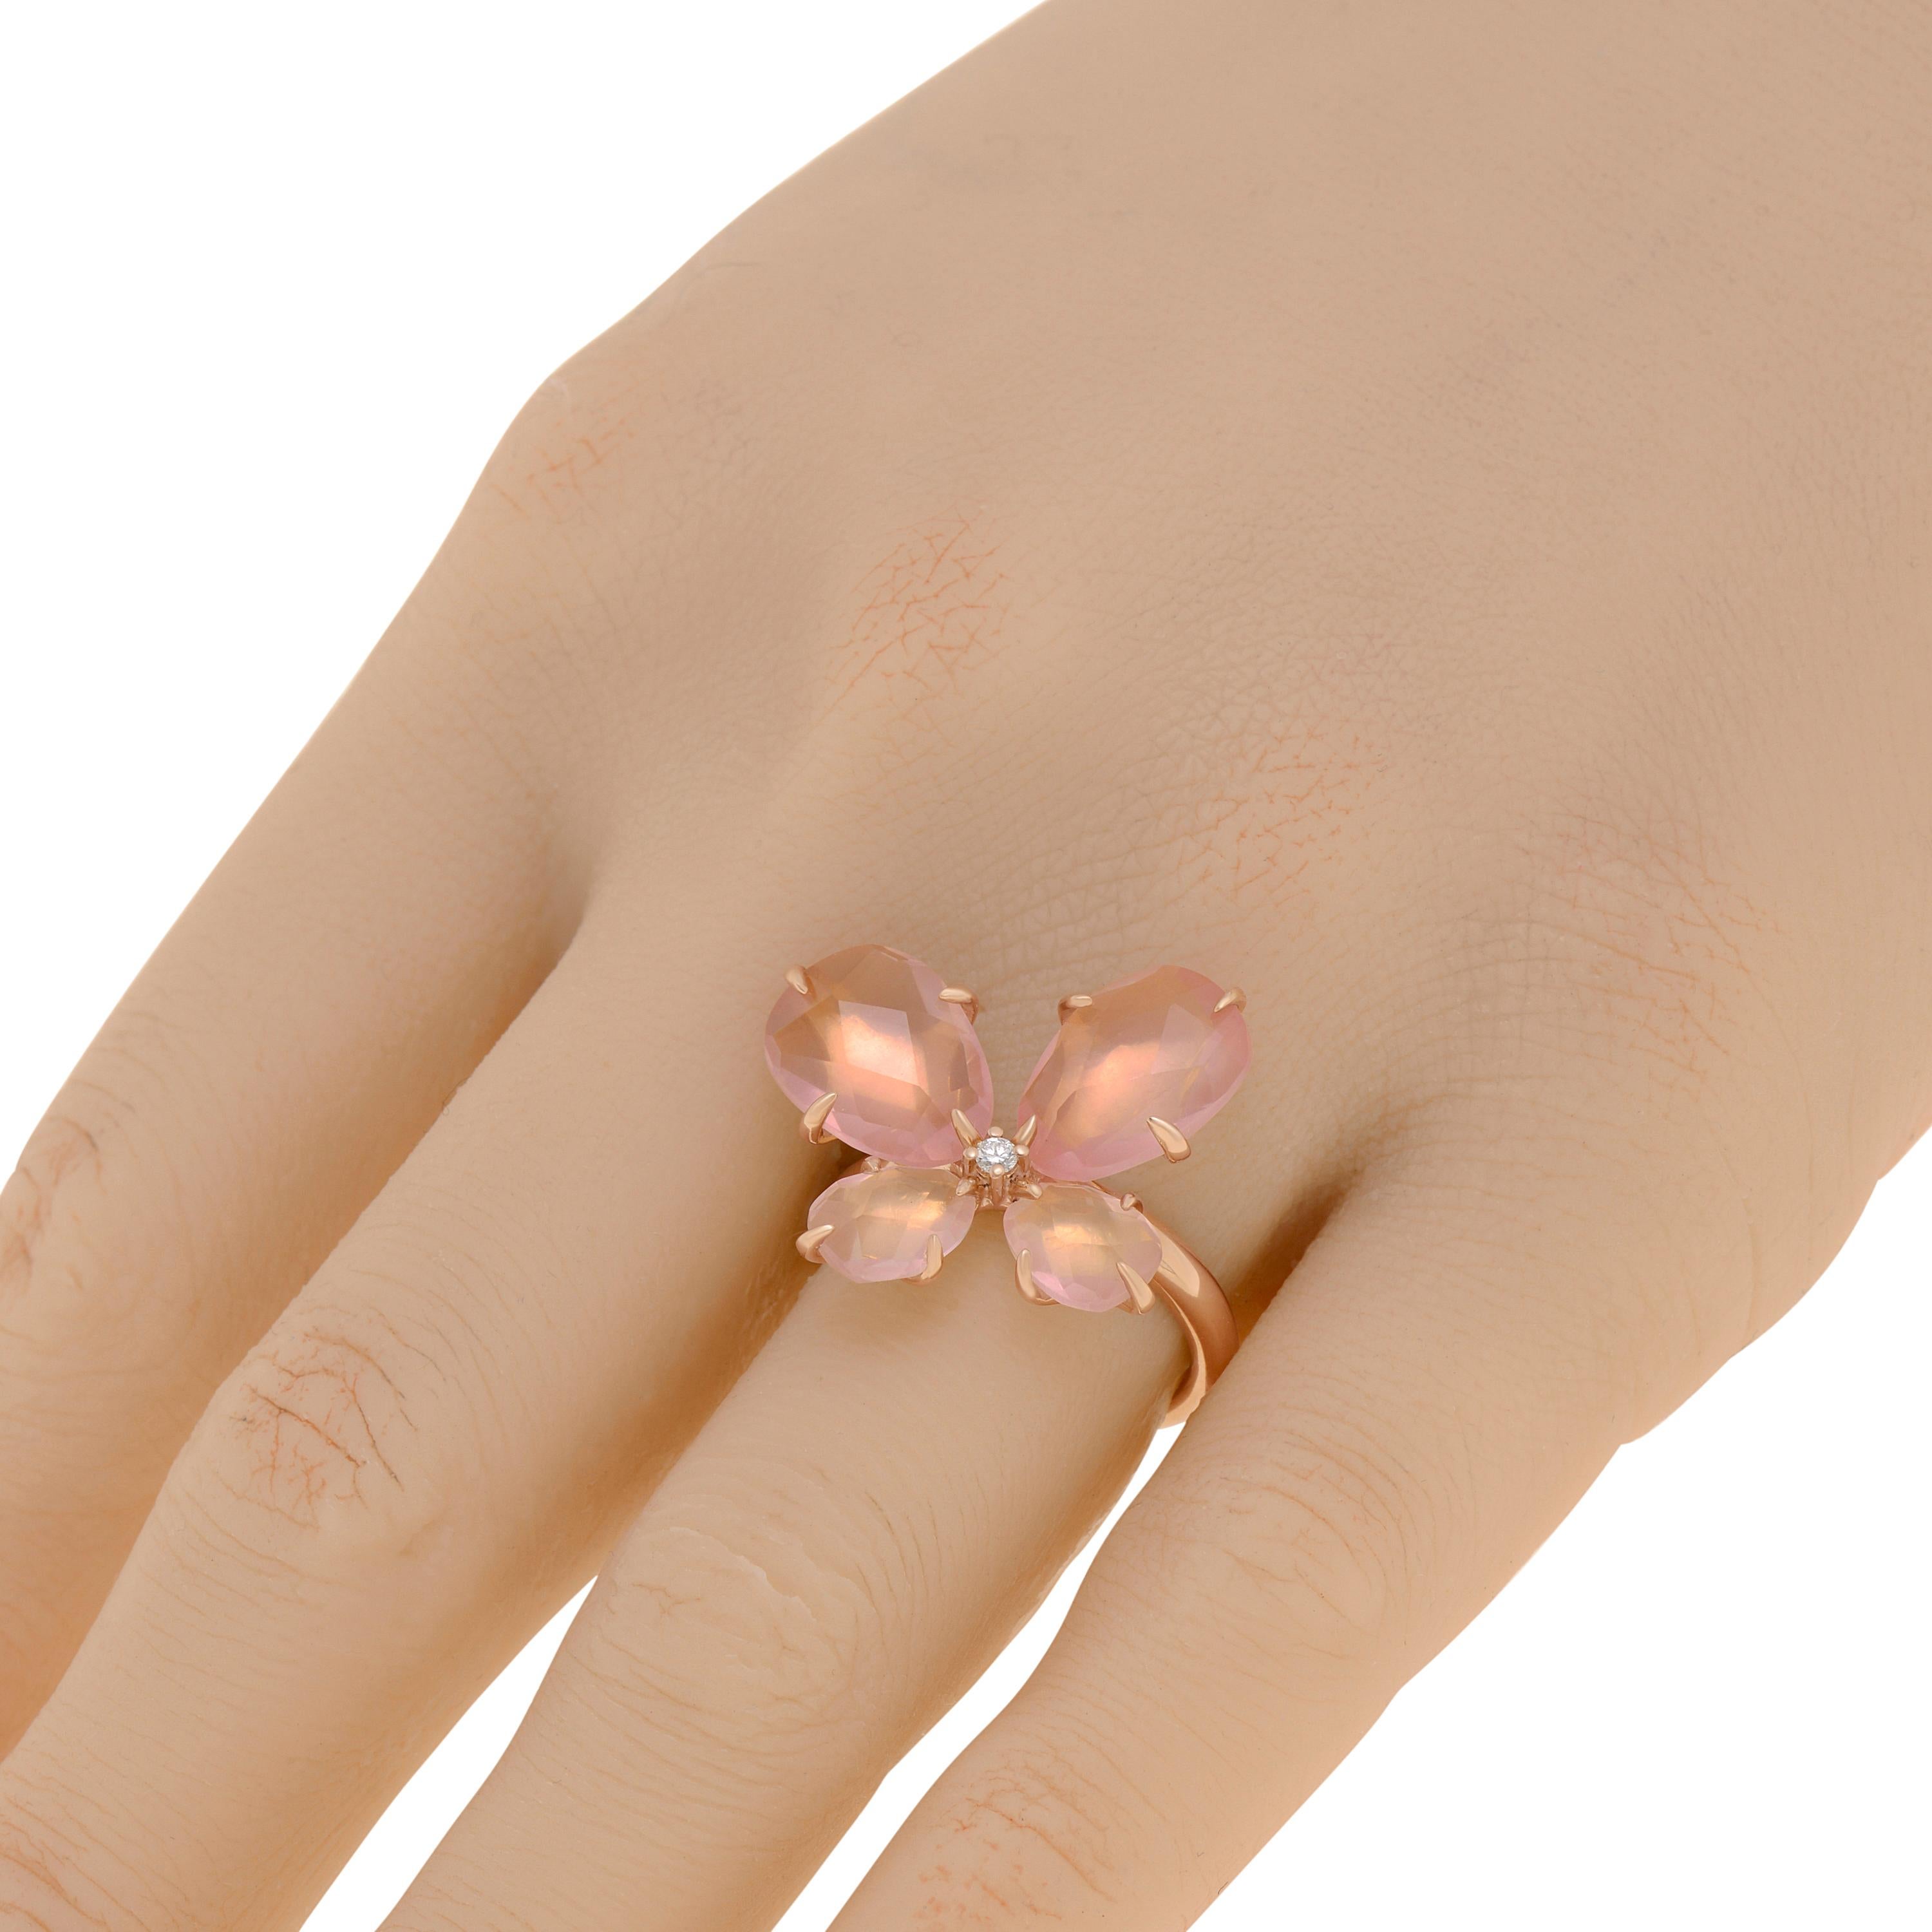 Mimi Milano 18K rose gold statement ring features faceted pink Quartz petals sparkling with a 0.04ct. tw. center accent diamond. The ring size is 6.5 (53). The decoration size is 7/8